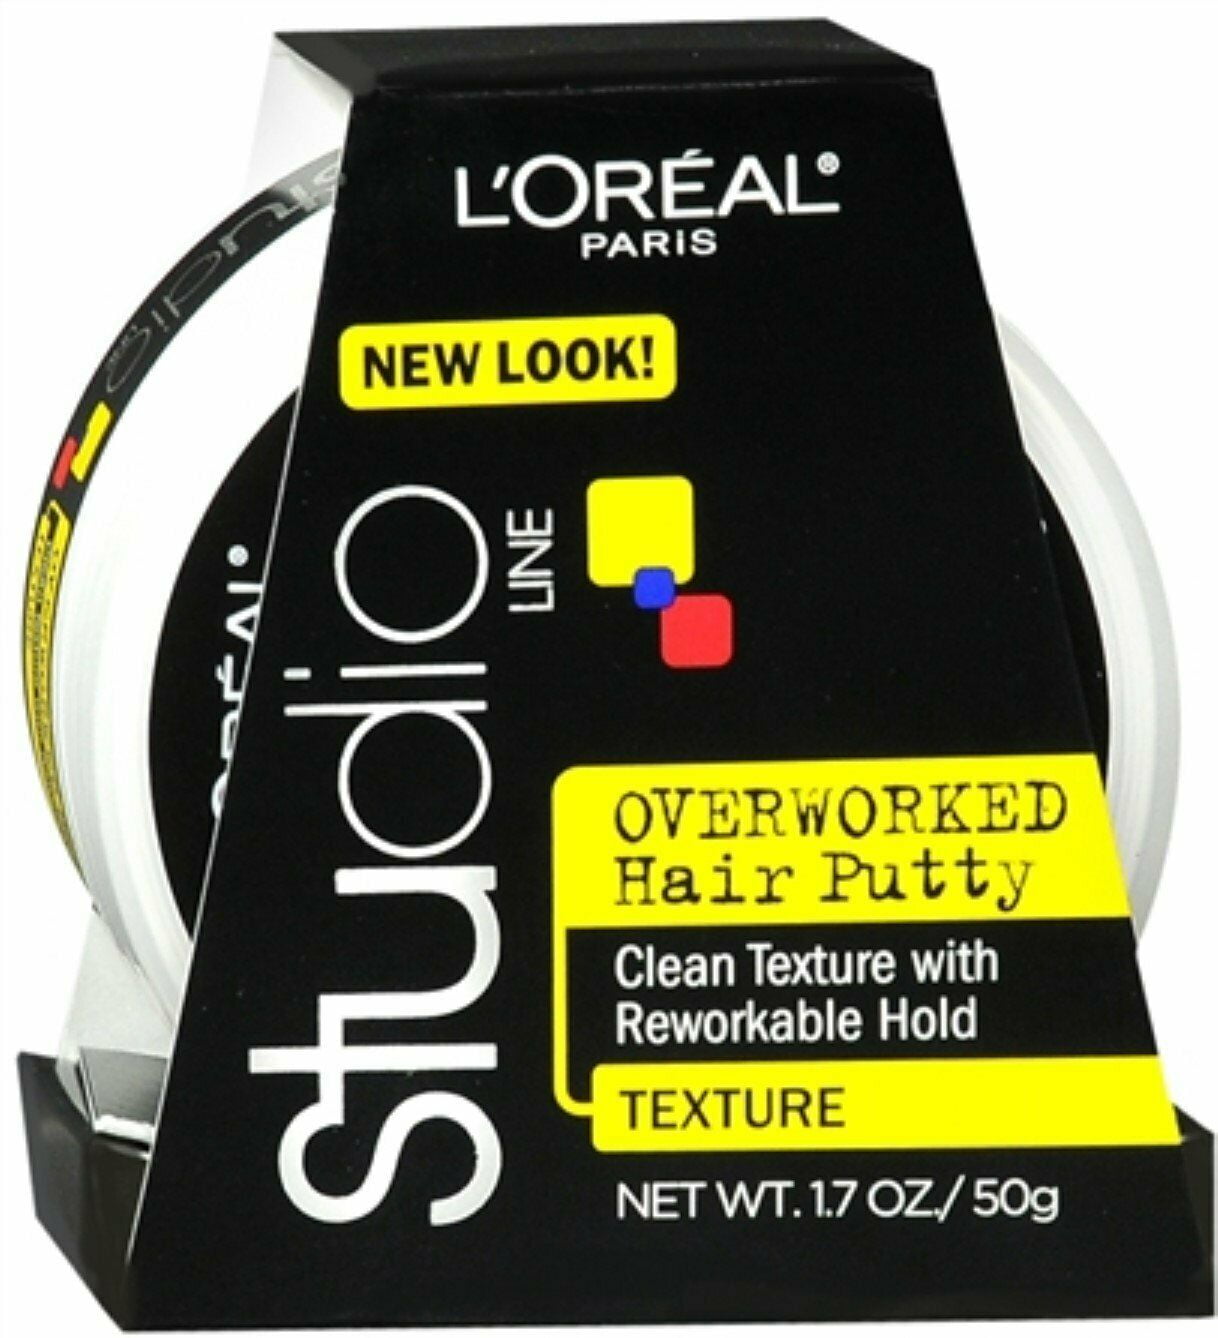 loreal overworked hair putty review